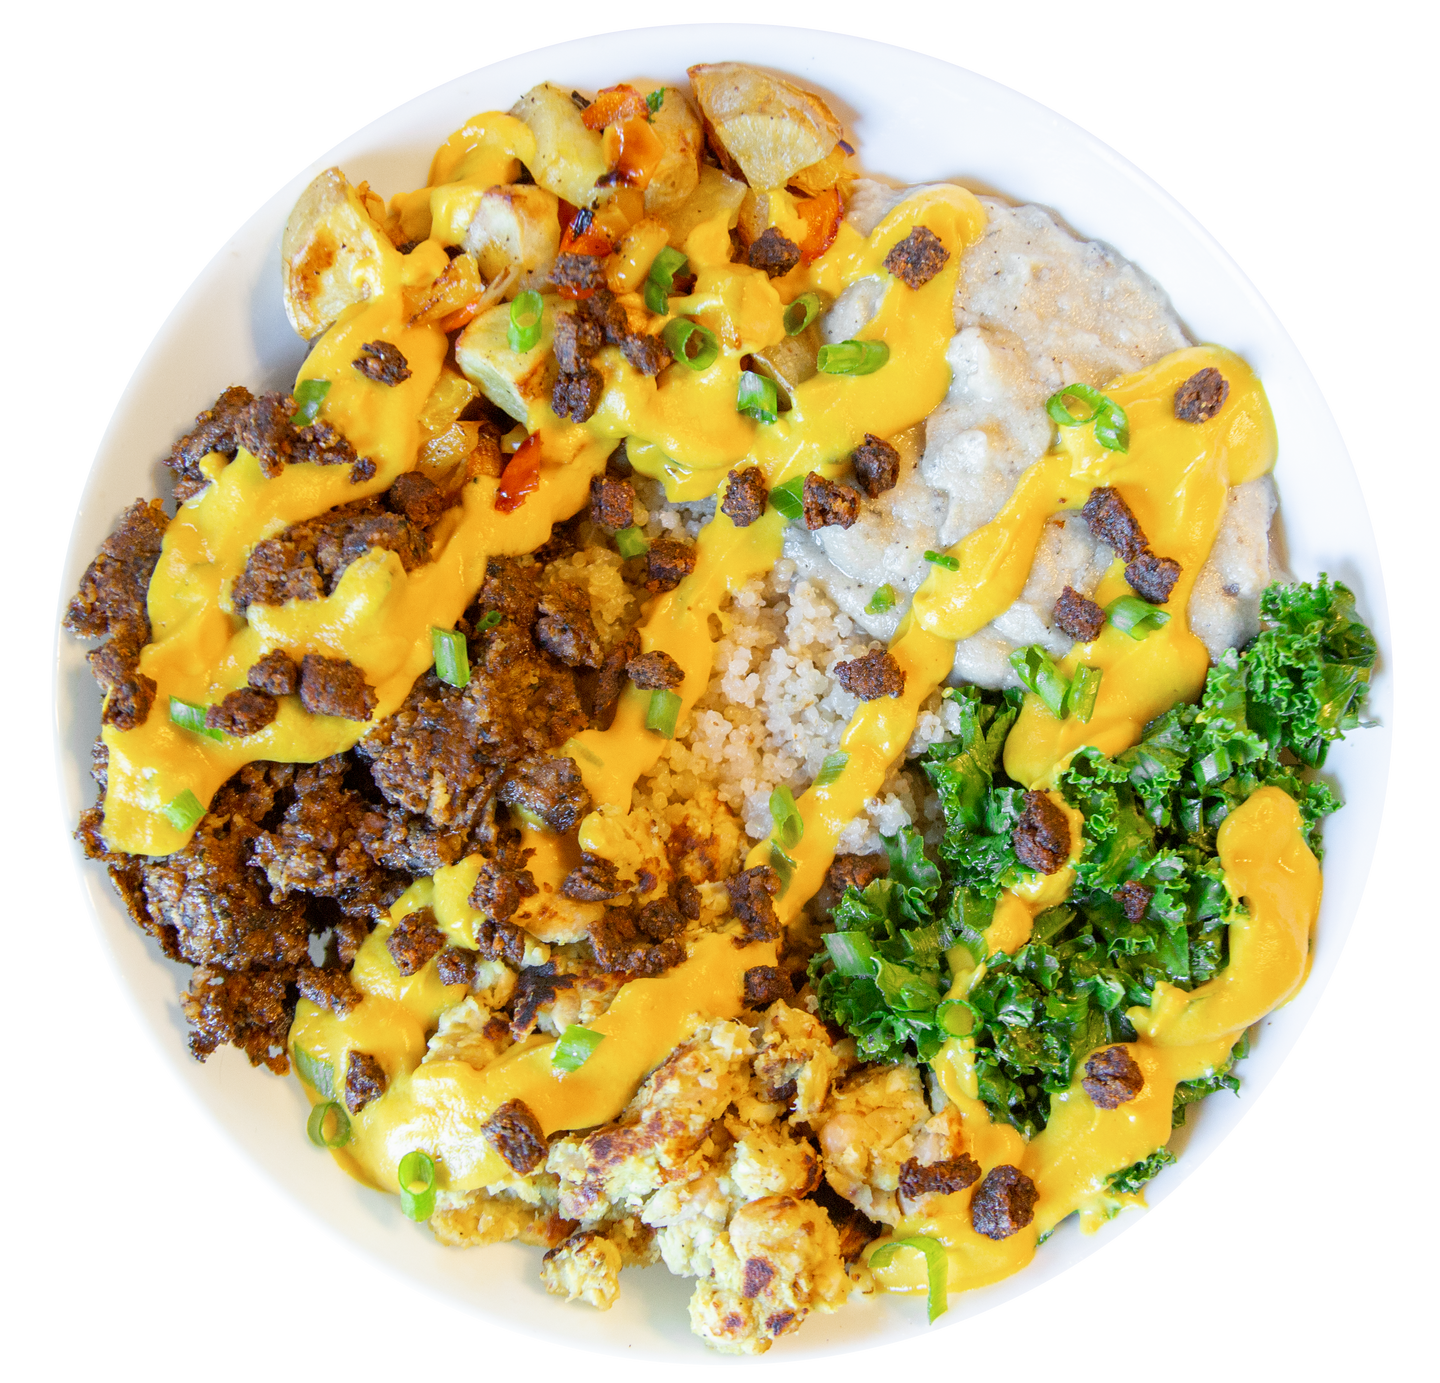 vegan breakfast bowl with non-dairy cheese and plant-based meat substitute in Des Moines, Iowa